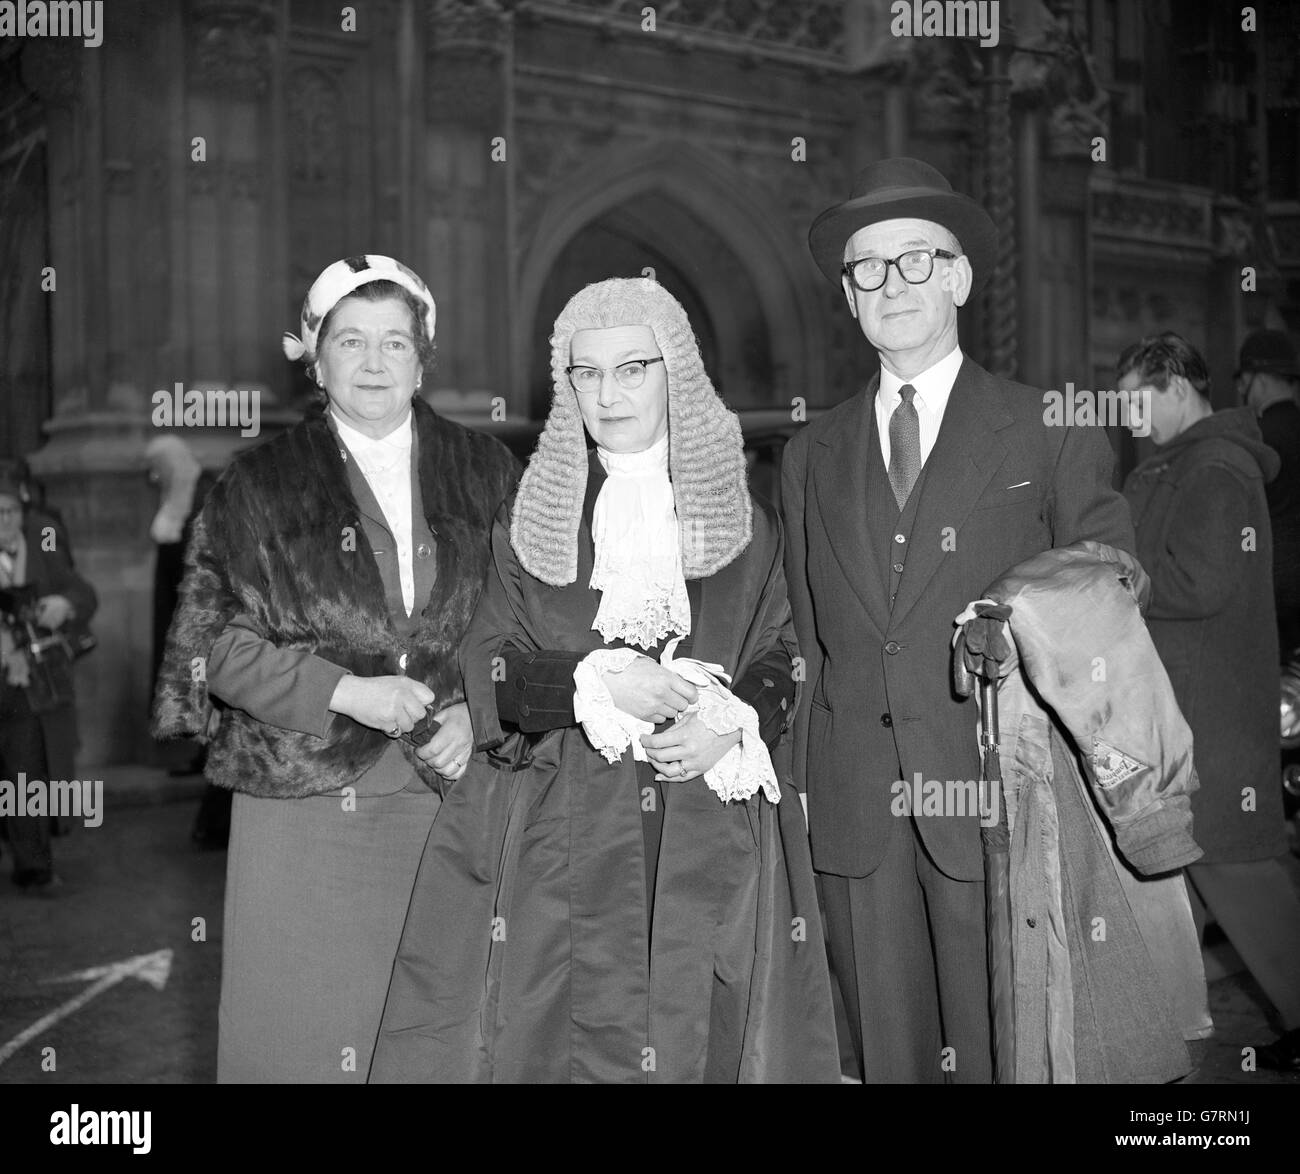 Elizabeth Kathleen Lane, QC, pictured after attending the swearing-in ceremony at the House of Lords in London. Mrs Lane is one of the best-known criminal court barristers in England. She was first called to the Bar in 1940 and is the wife to Henry Jerrold Randall Lane (r), the barrister. Mrs Lane was the first women to appear in a murder appeal at the House of Lords 14 years ago. She argued, unsuccessfully, for Leonard Holmes, an ex-soldier accused of murdering his wife. Also pictured is Mrs John Swallow (l). Stock Photo